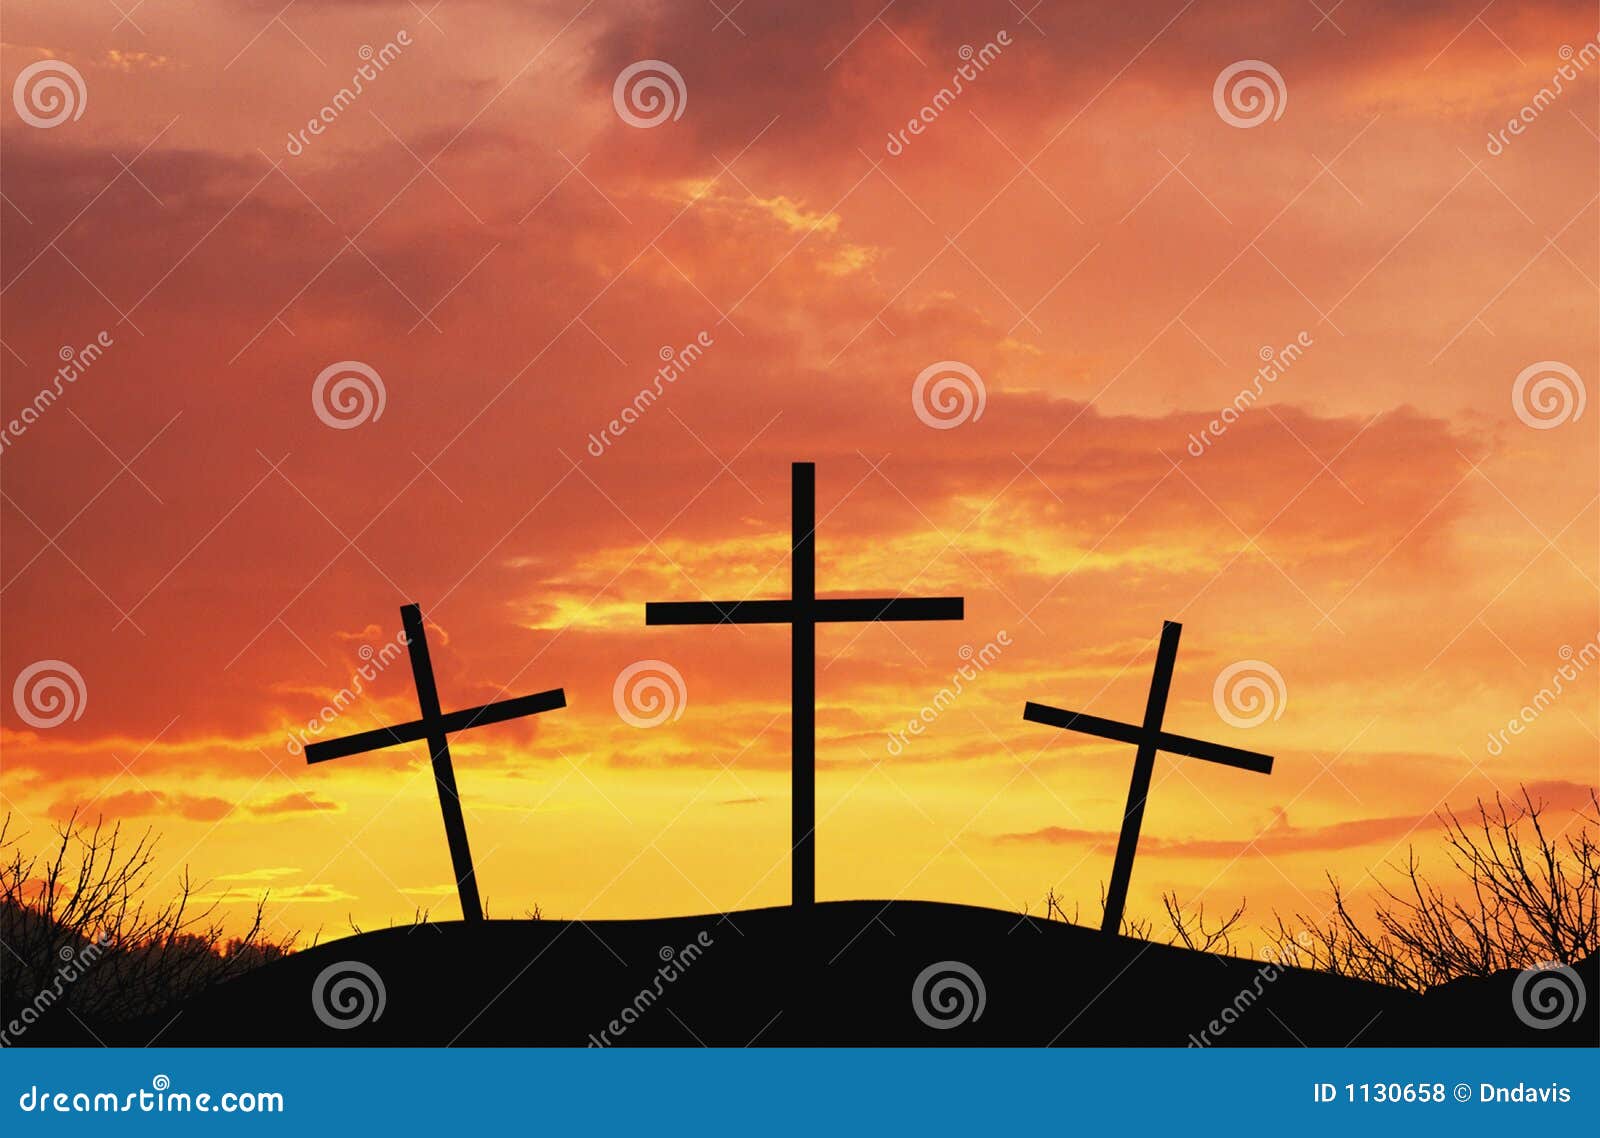 three crosses on top af hill